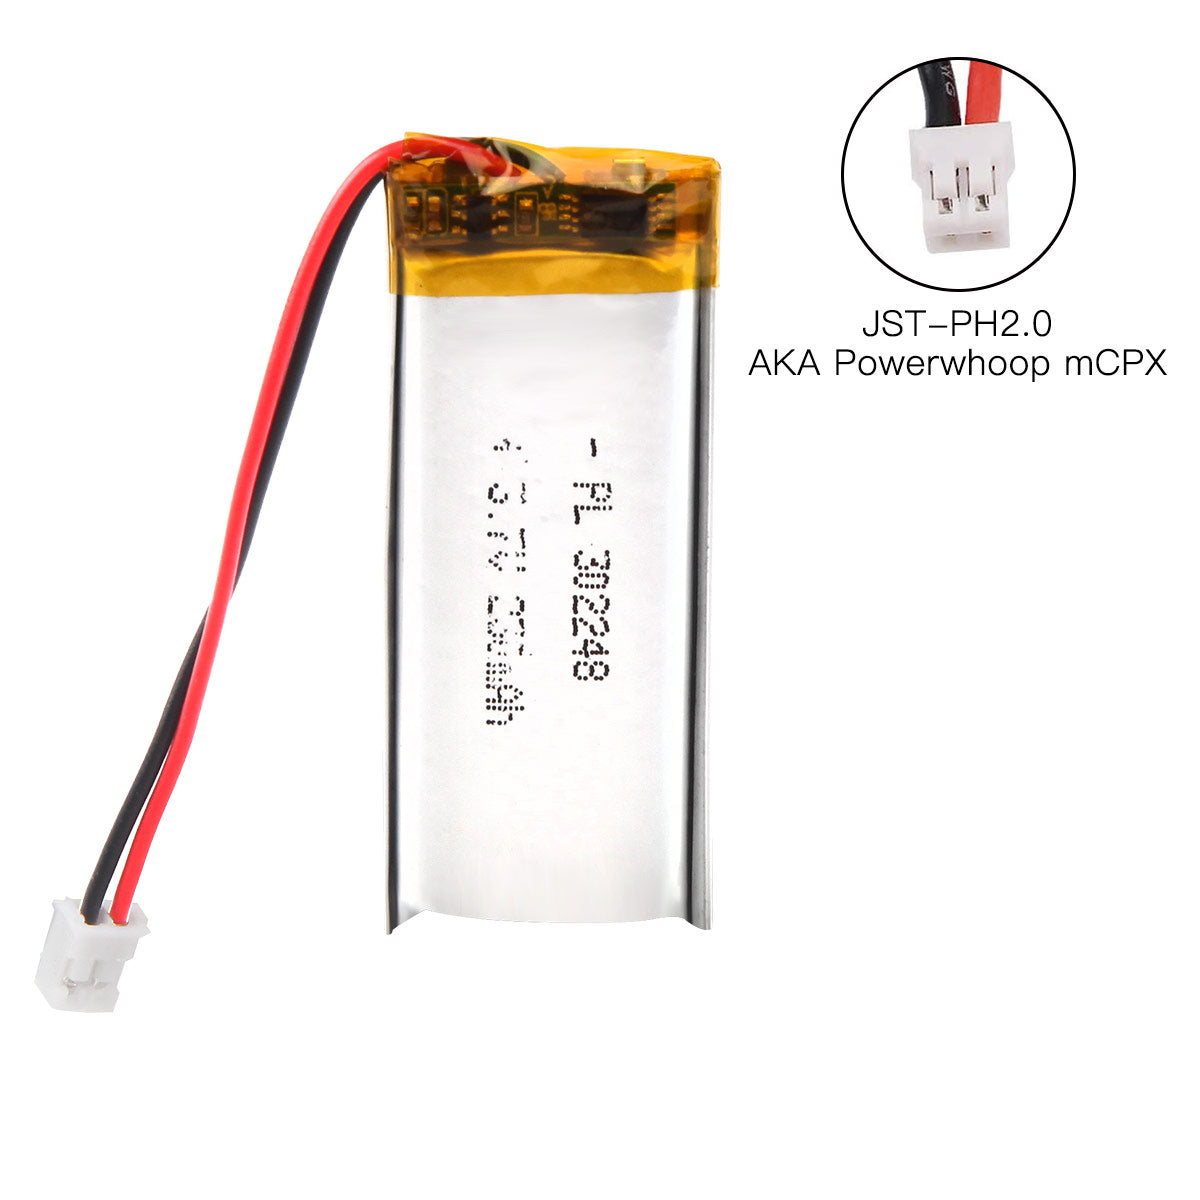 YDL 3.7V 230mAh 302248 Rechargeable Lithium Polymer Battery Length 50mm